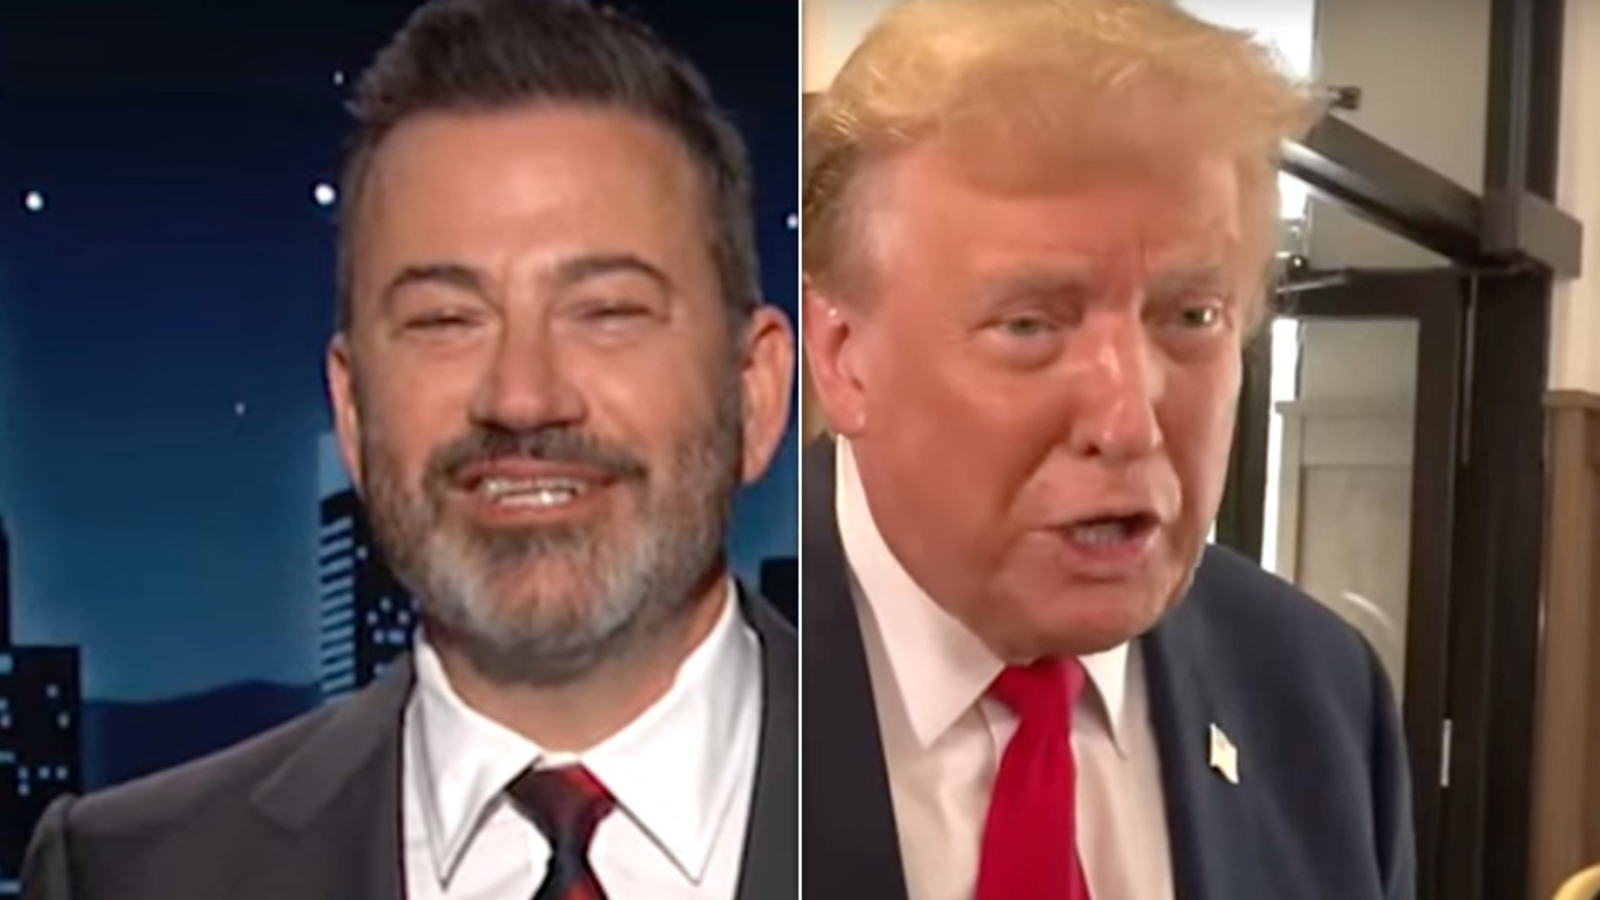 jimmy kimmel taunts 'muttering' trump over bonkers claim in the strangest place